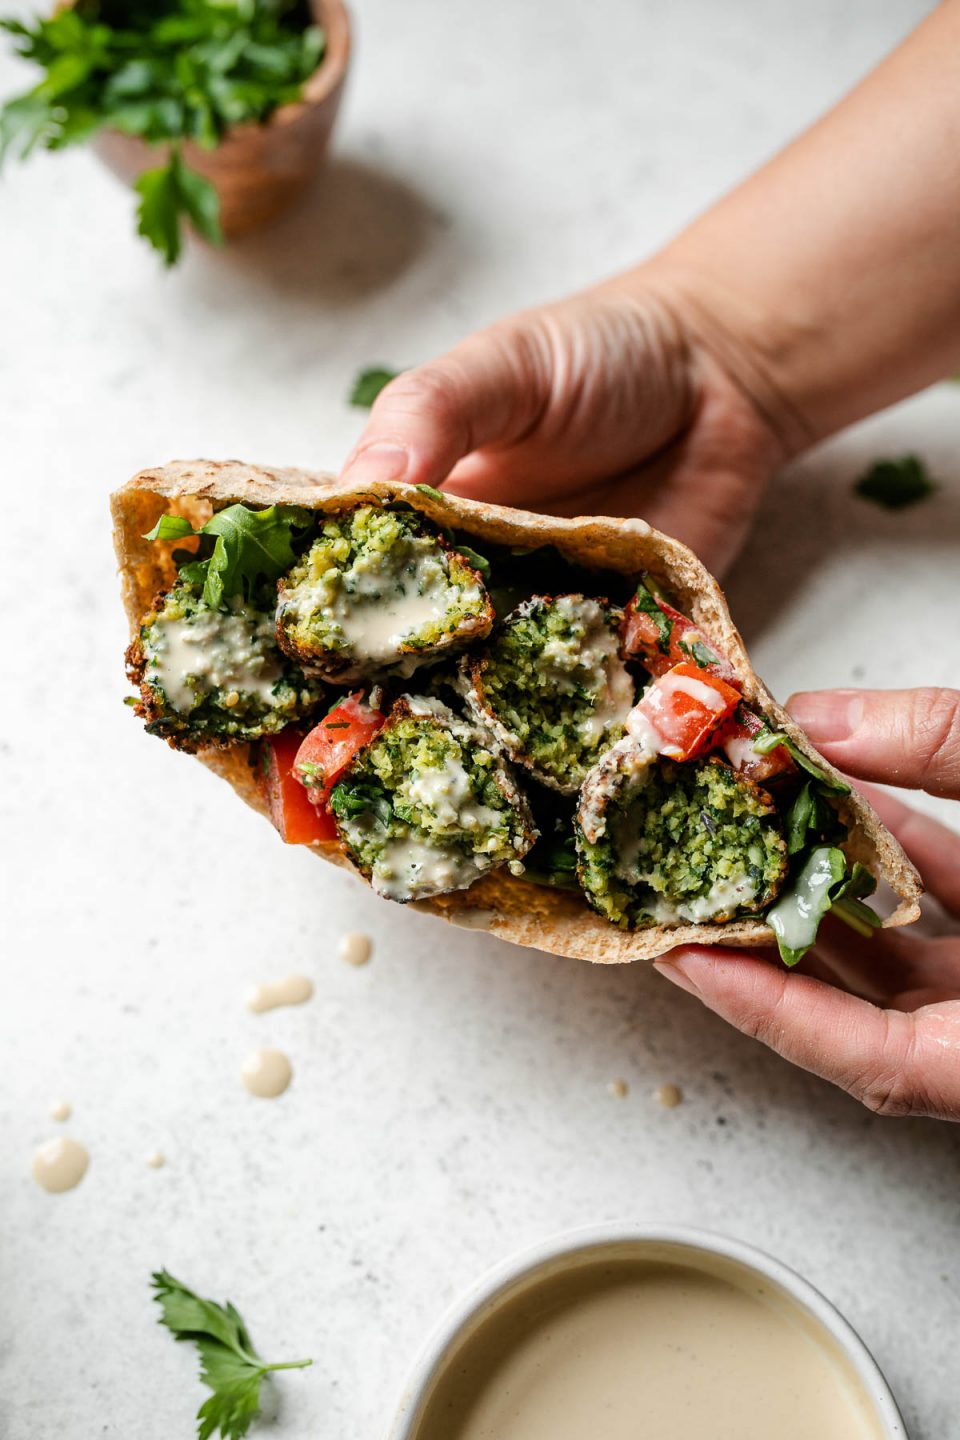 A woman's hands hold a pita filled with crispy herbed green falafel, diced tomatoes, and arugula that has been drizzled with tahini sauce. Her hands rest atop a creamy white textured surface, while loose fresh herbs, a bunch of fresh parsley in a wooden bowl, a small white bowl filled with tahini sauce and drops of spilled tahini sauce surround.